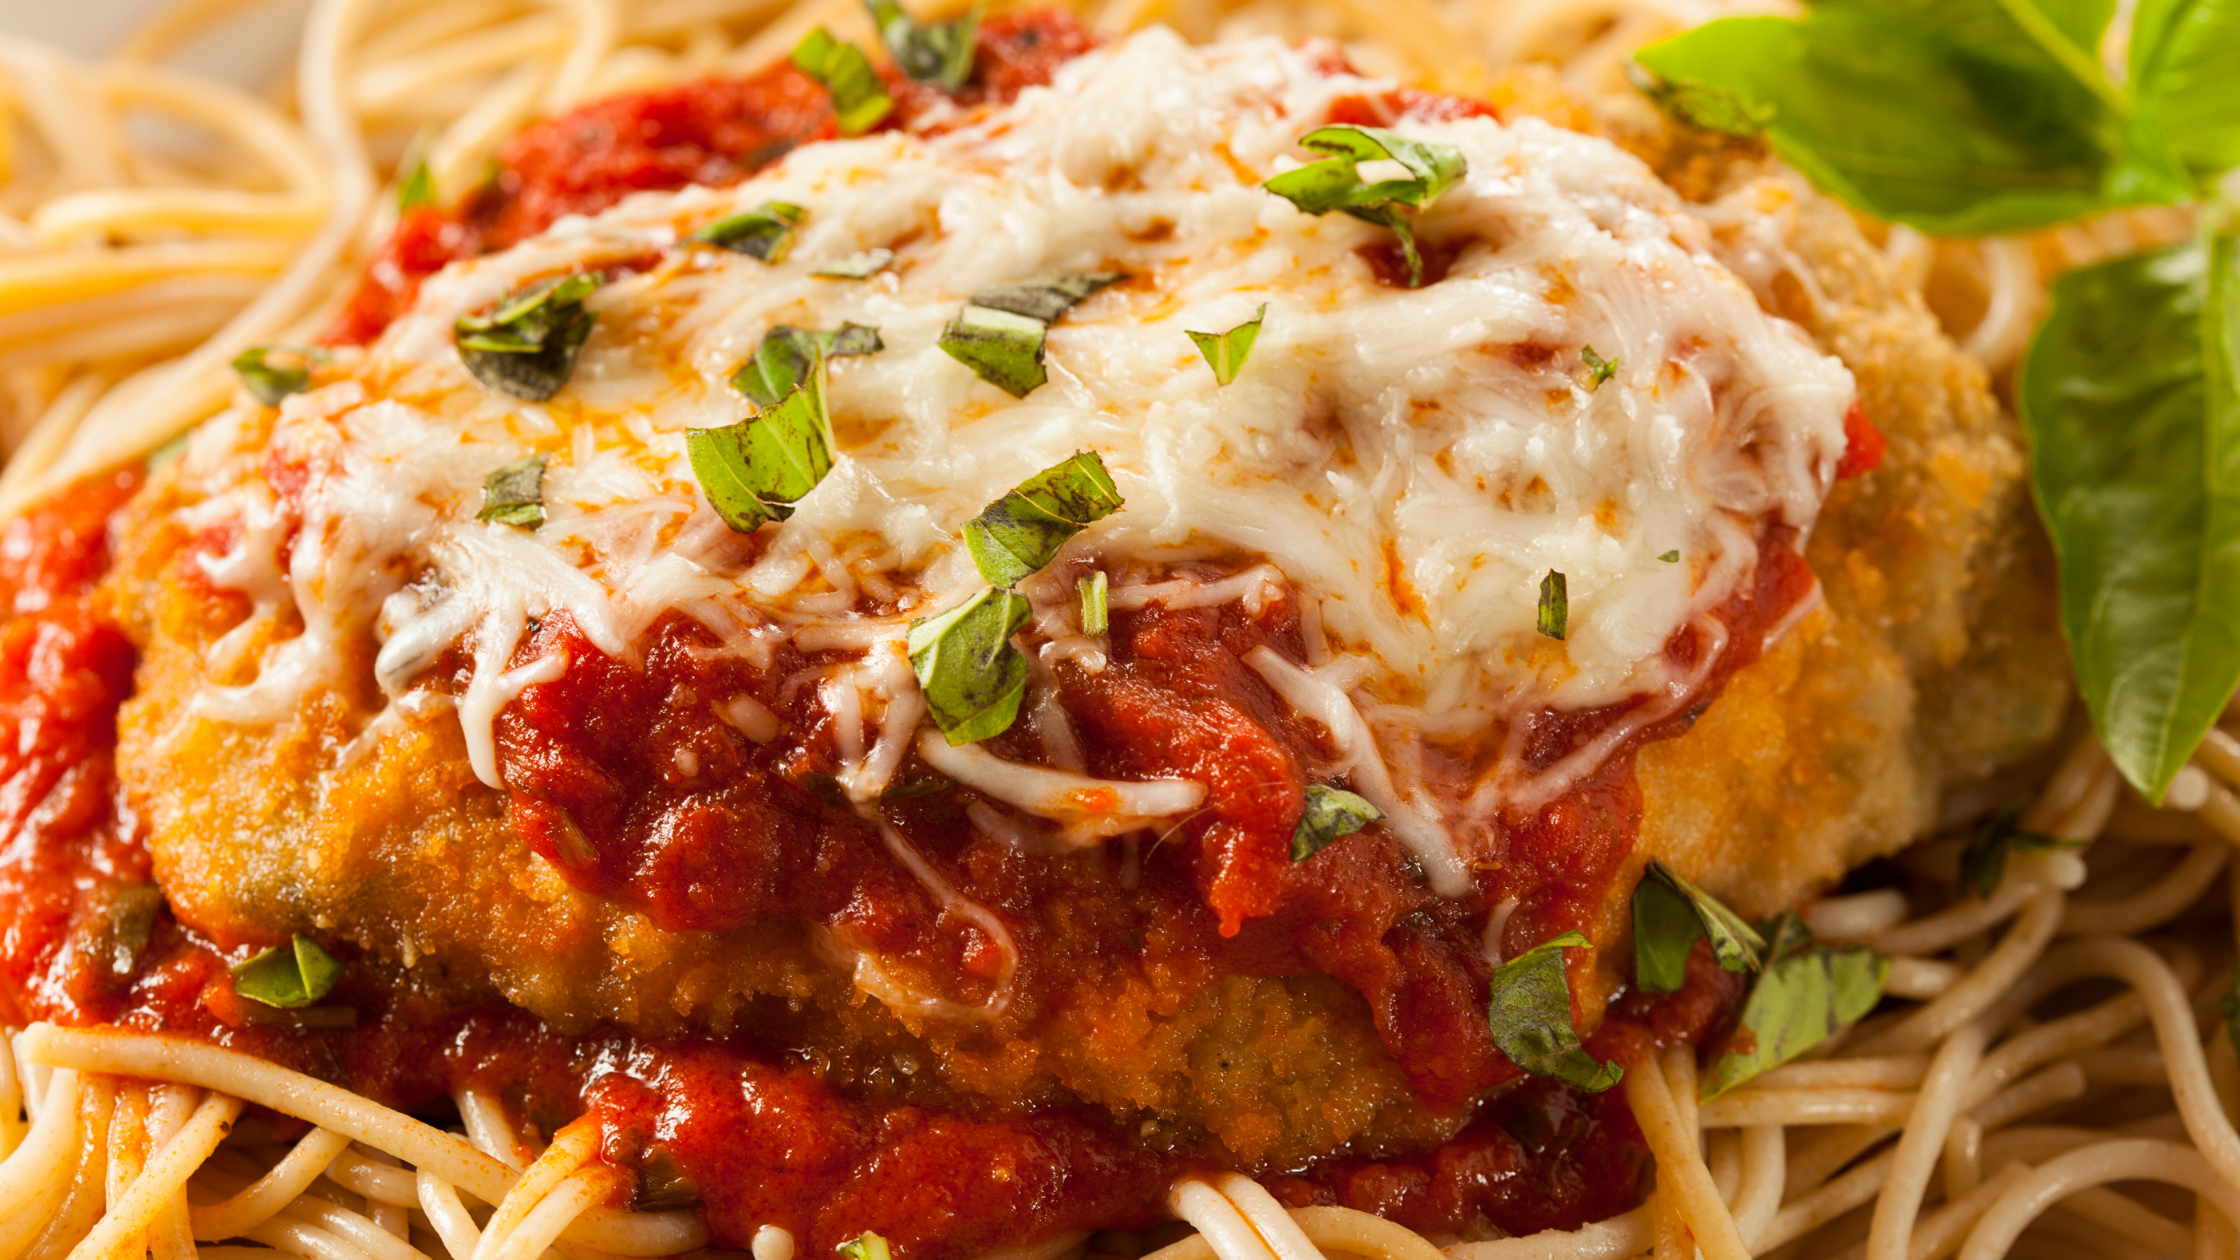 Low Calorie Chicken Parmesan with Whole Grain Spaghetti: A Healthy Recipe for Delicious Italian Food 7